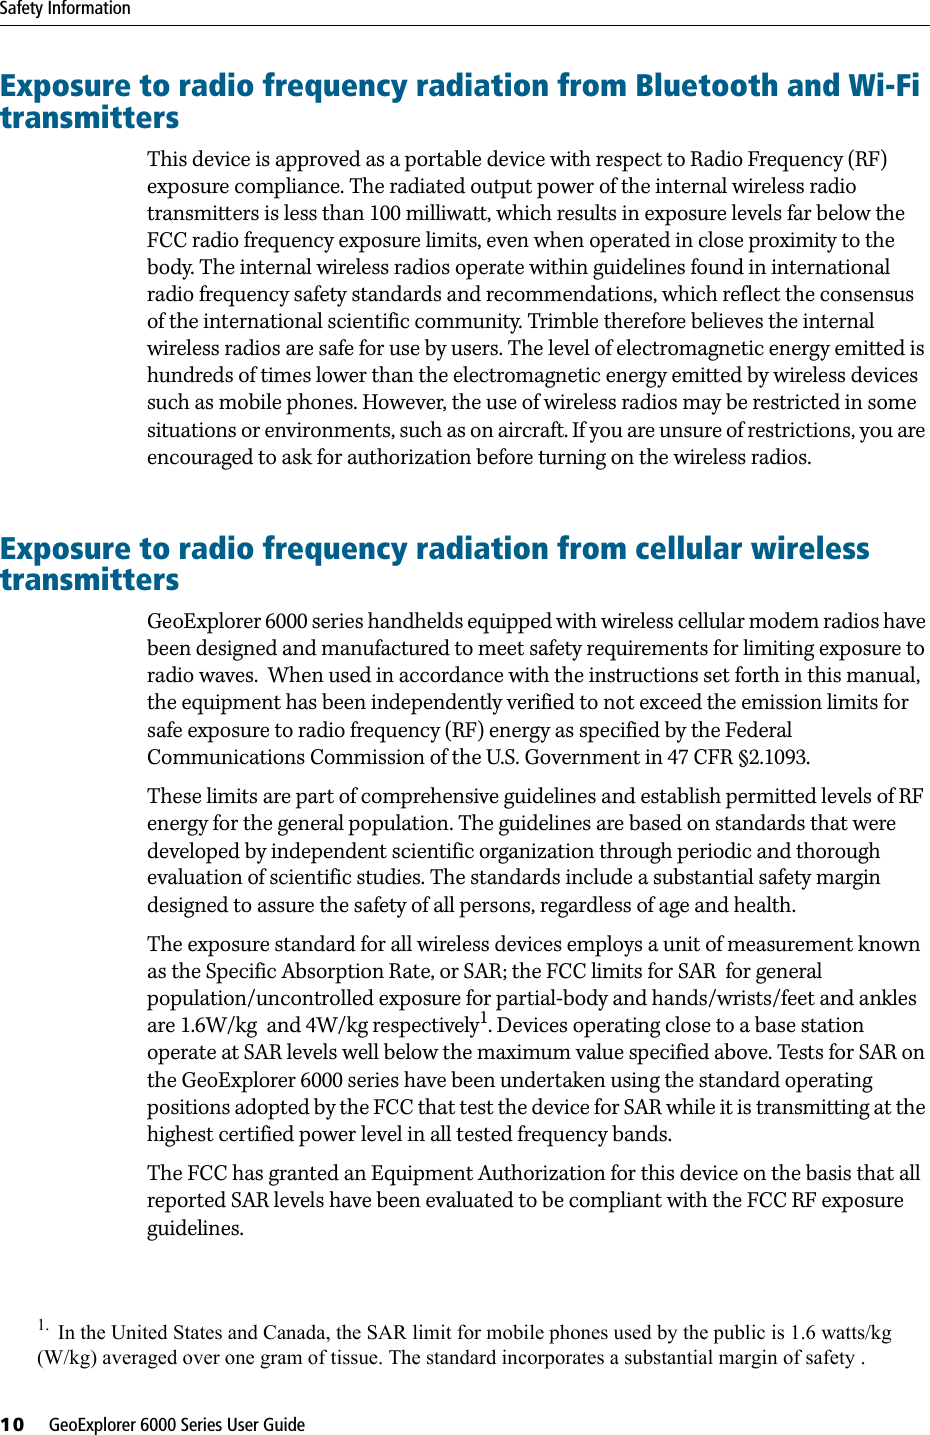 Safety Information10     GeoExplorer 6000 Series User GuideExposure to radio frequency radiation from Bluetooth and Wi-Fi transmittersThis device is approved as a portable device with respect to Radio Frequency (RF) exposure compliance. The radiated output power of the internal wireless radio transmitters is less than 100 milliwatt, which results in exposure levels far below the FCC radio frequency exposure limits, even when operated in close proximity to the body. The internal wireless radios operate within guidelines found in international radio frequency safety standards and recommendations, which reflect the consensus of the international scientific community. Trimble therefore believes the internal wireless radios are safe for use by users. The level of electromagnetic energy emitted is hundreds of times lower than the electromagnetic energy emitted by wireless devices such as mobile phones. However, the use of wireless radios may be restricted in some situations or environments, such as on aircraft. If you are unsure of restrictions, you are encouraged to ask for authorization before turning on the wireless radios.Exposure to radio frequency radiation from cellular wireless transmittersGeoExplorer 6000 series handhelds equipped with wireless cellular modem radios have been designed and manufactured to meet safety requirements for limiting exposure to radio waves.  When used in accordance with the instructions set forth in this manual, the equipment has been independently verified to not exceed the emission limits for safe exposure to radio frequency (RF) energy as specified by the Federal Communications Commission of the U.S. Government in 47 CFR §2.1093.These limits are part of comprehensive guidelines and establish permitted levels of RF energy for the general population. The guidelines are based on standards that were developed by independent scientific organization through periodic and thorough evaluation of scientific studies. The standards include a substantial safety margin designed to assure the safety of all persons, regardless of age and health.The exposure standard for all wireless devices employs a unit of measurement known as the Specific Absorption Rate, or SAR; the FCC limits for SAR  for general population/uncontrolled exposure for partial-body and hands/wrists/feet and ankles  are 1.6W/kg  and 4W/kg respectively1. Devices operating close to a base station operate at SAR levels well below the maximum value specified above. Tests for SAR on the GeoExplorer 6000 series have been undertaken using the standard operating positions adopted by the FCC that test the device for SAR while it is transmitting at the highest certified power level in all tested frequency bands. The FCC has granted an Equipment Authorization for this device on the basis that all reported SAR levels have been evaluated to be compliant with the FCC RF exposure guidelines.1.  In the United States and Canada, the SAR limit for mobile phones used by the public is 1.6 watts/kg(W/kg) averaged over one gram of tissue. The standard incorporates a substantial margin of safety .